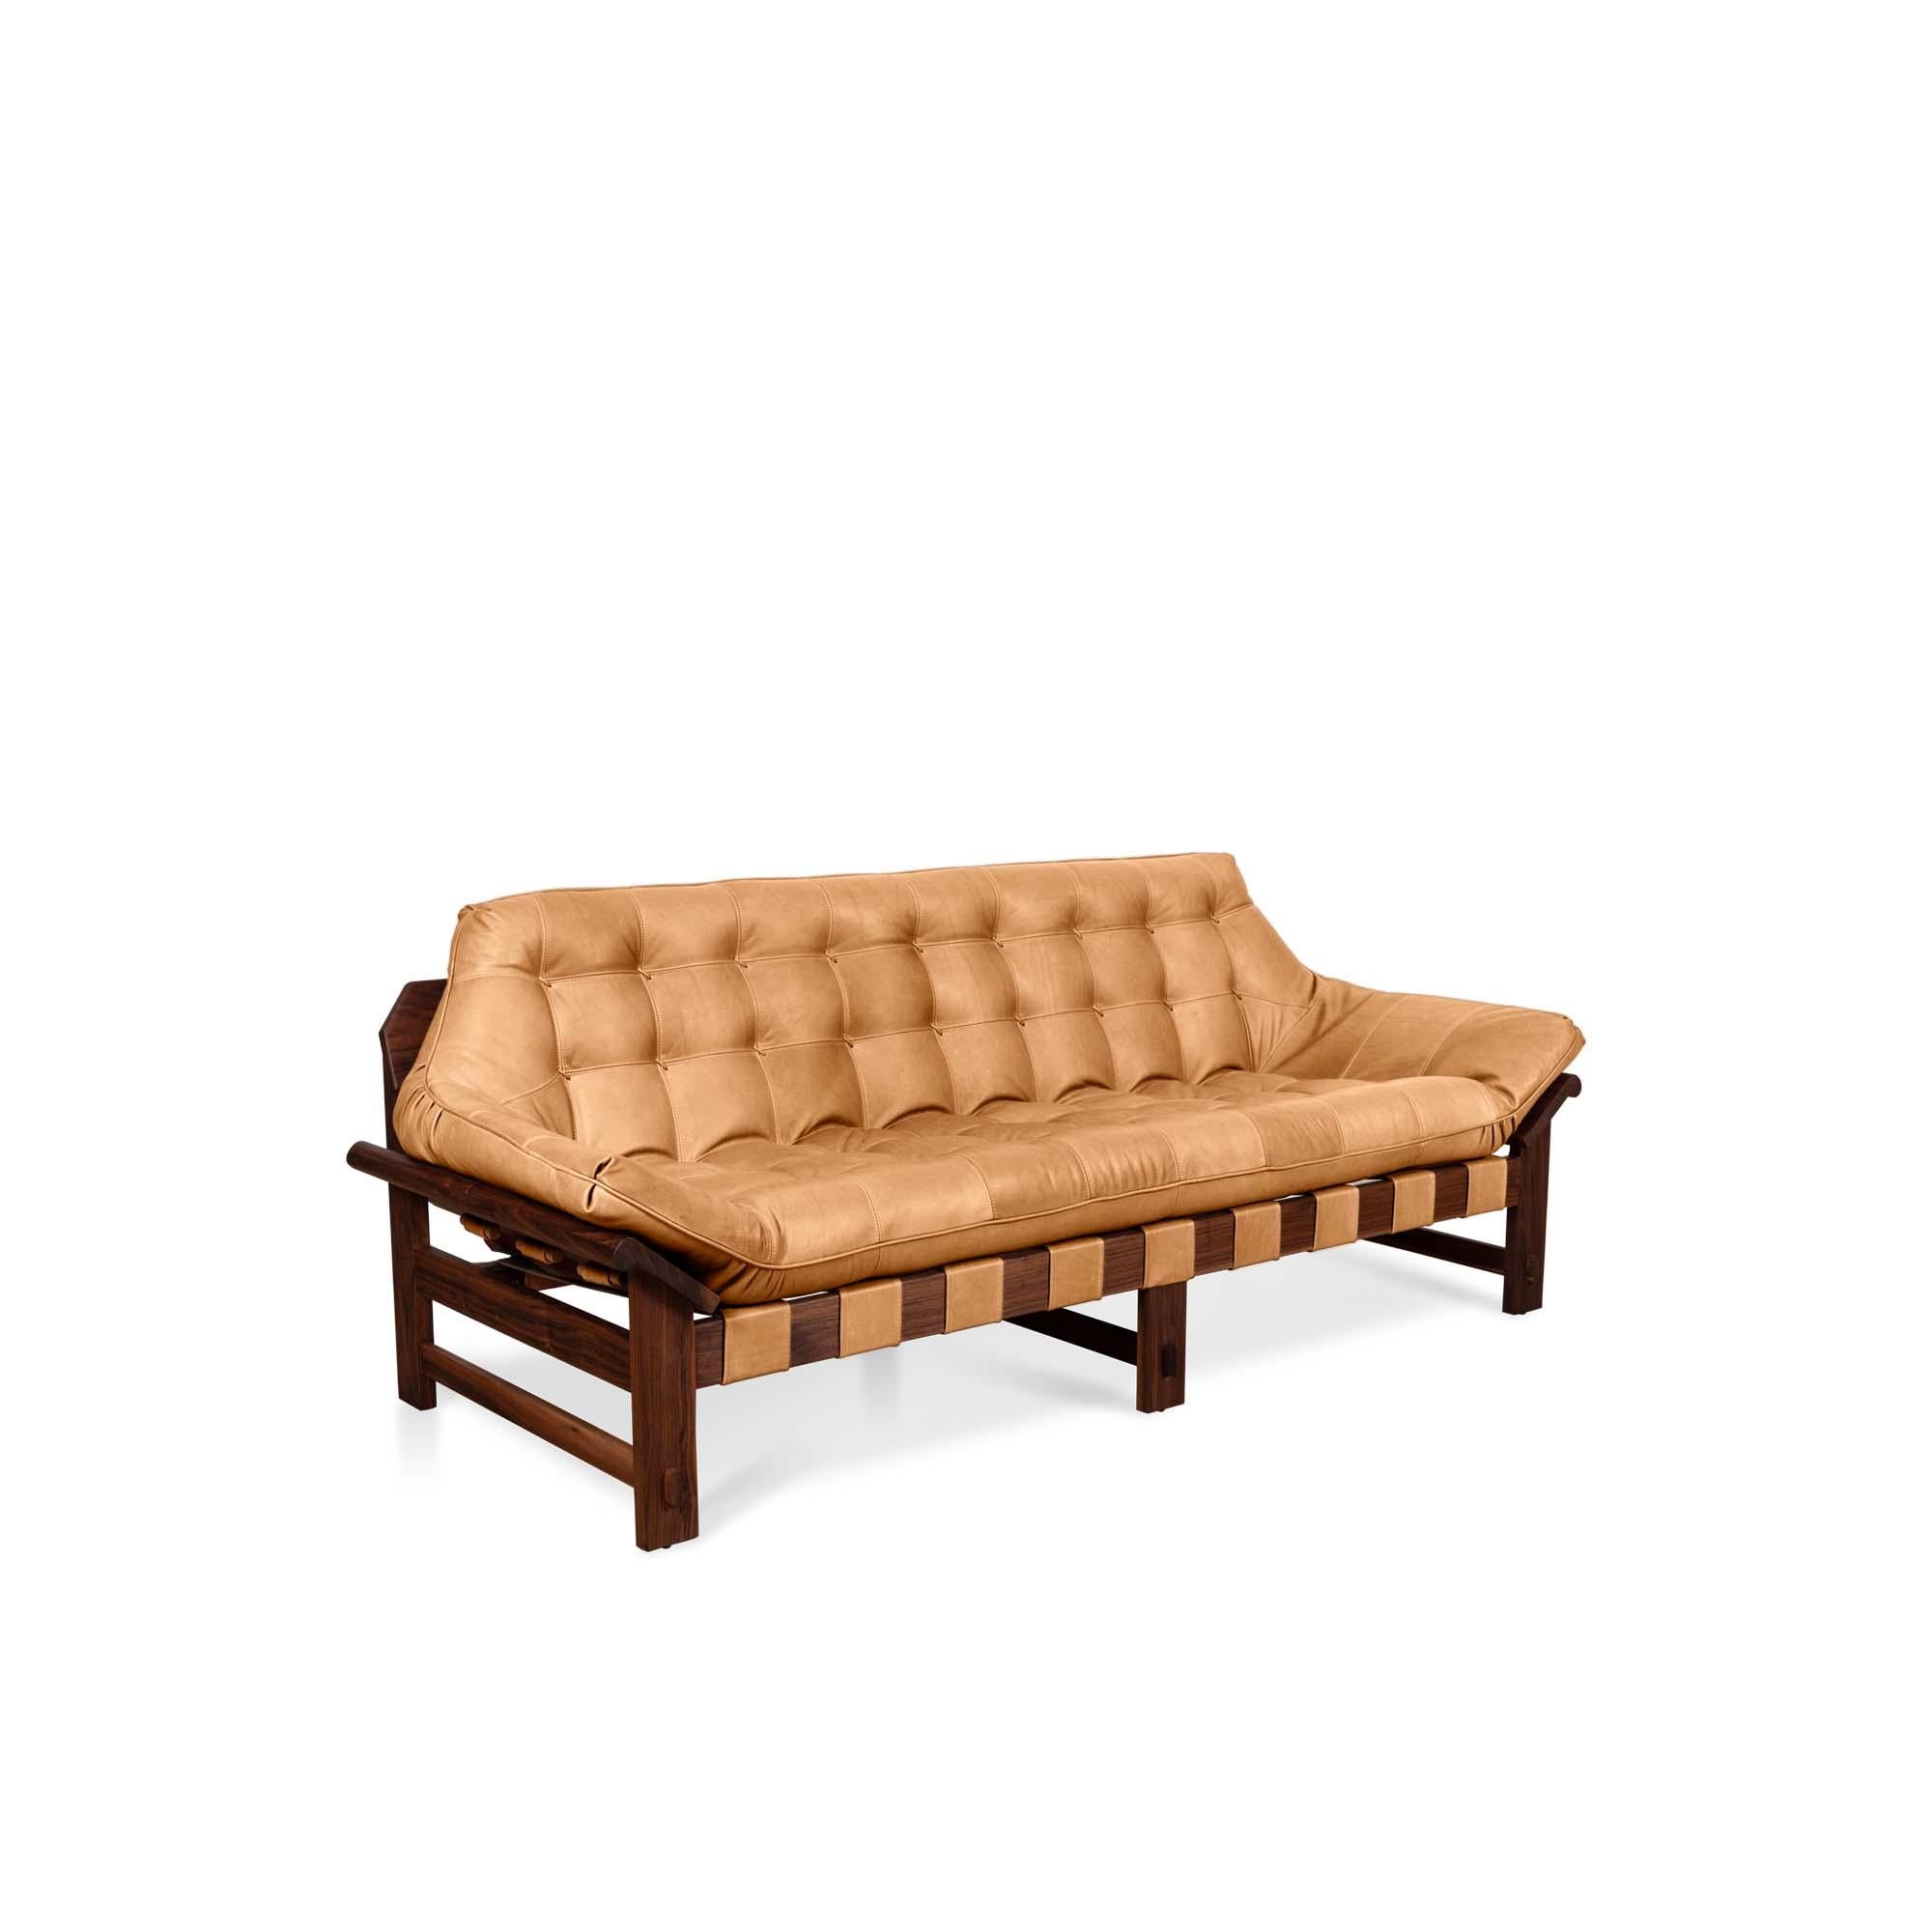 The Ojai sofa features a solid white oak or solid walnut base and a single tufted leather cushion with leather straps. Shown here in deer tan leather and oiled walnut. 

The Lawson-Fenning Collection is designed and handmade in Los Angeles,